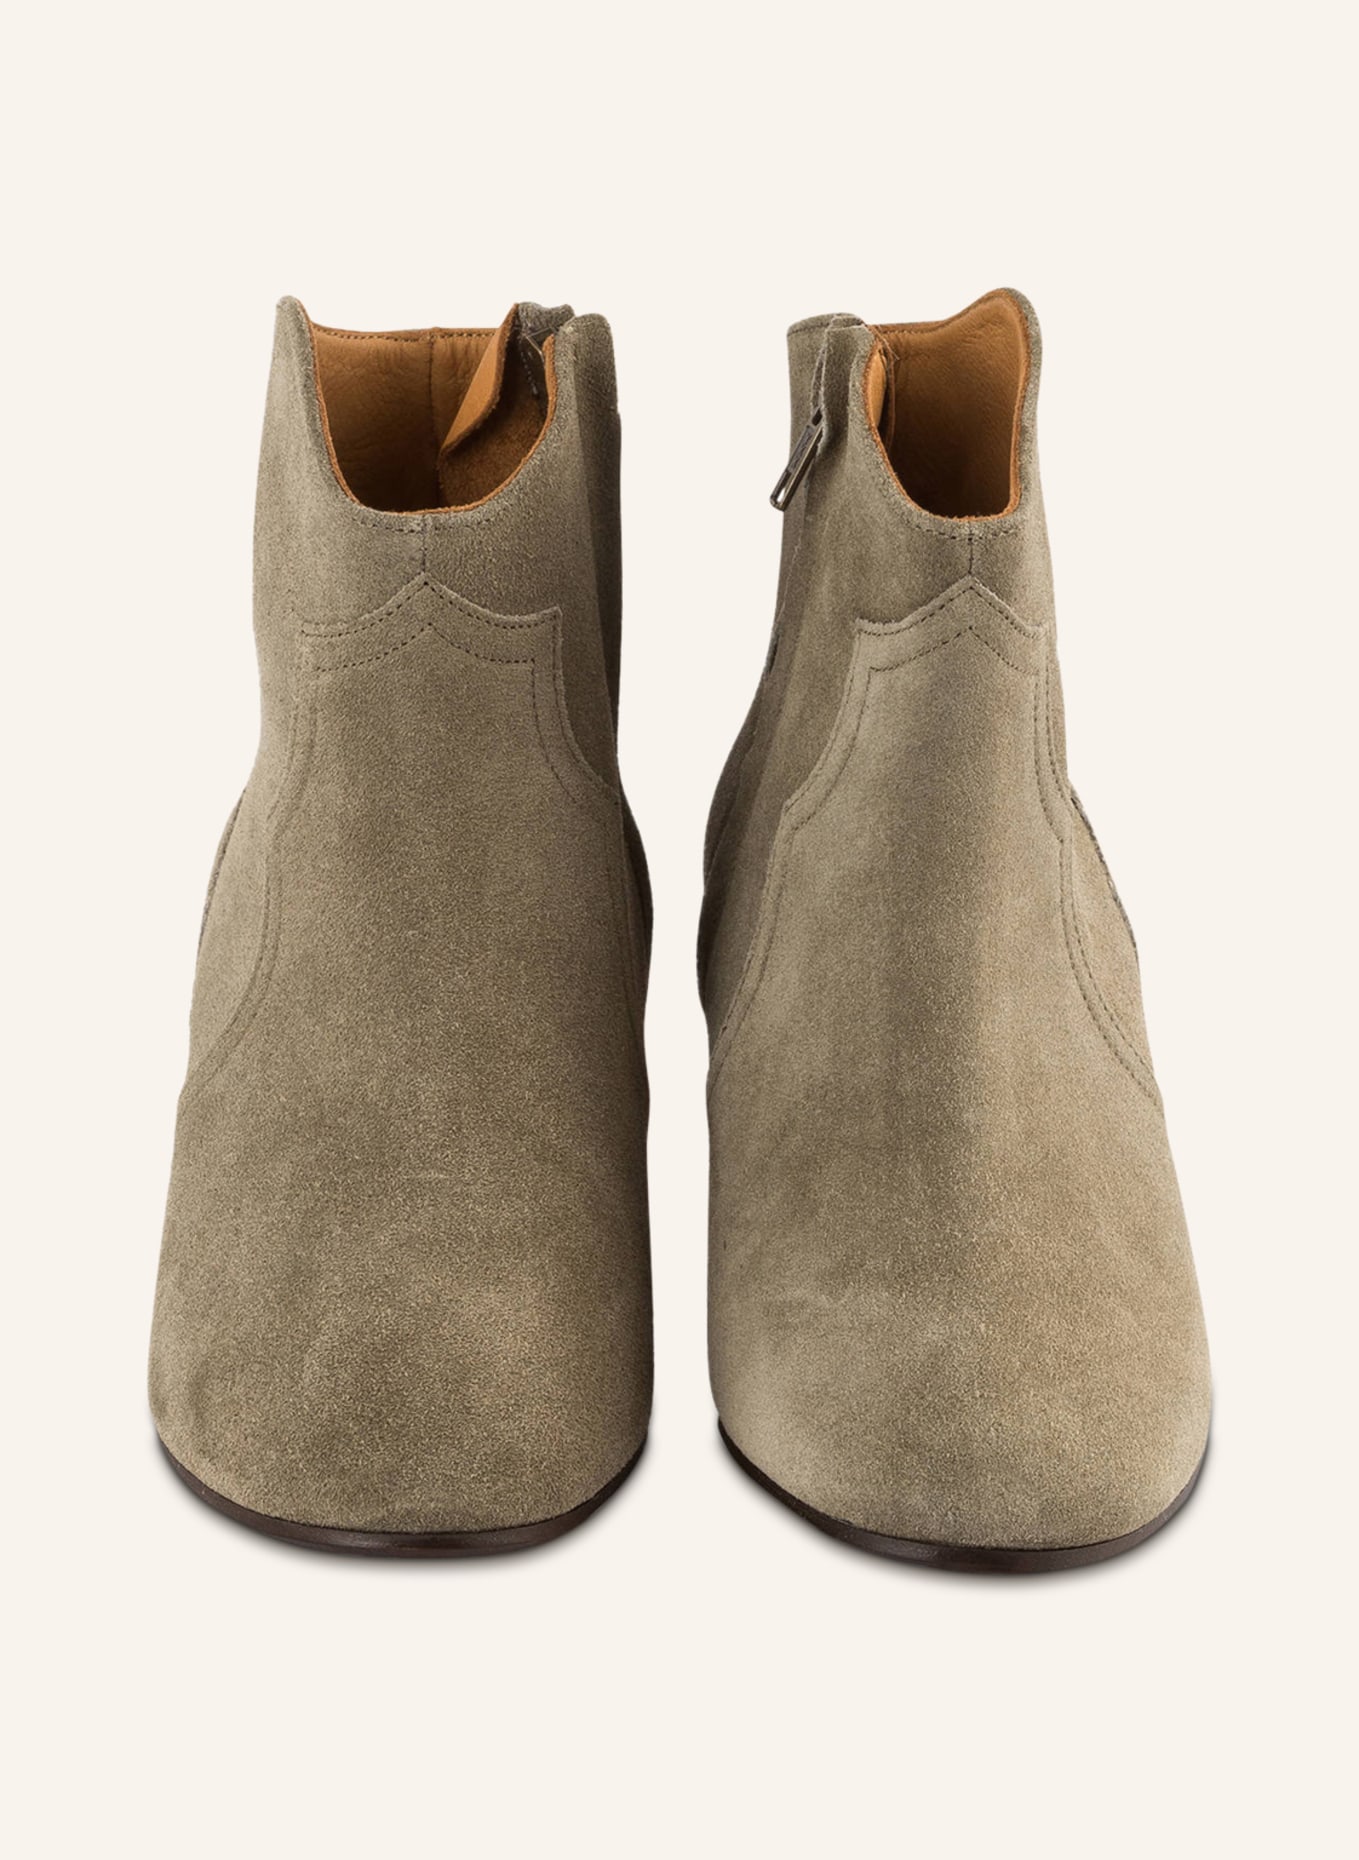 ISABEL MARANT Cowboy Boots DICKER, Farbe: TAUPE (Bild 3)